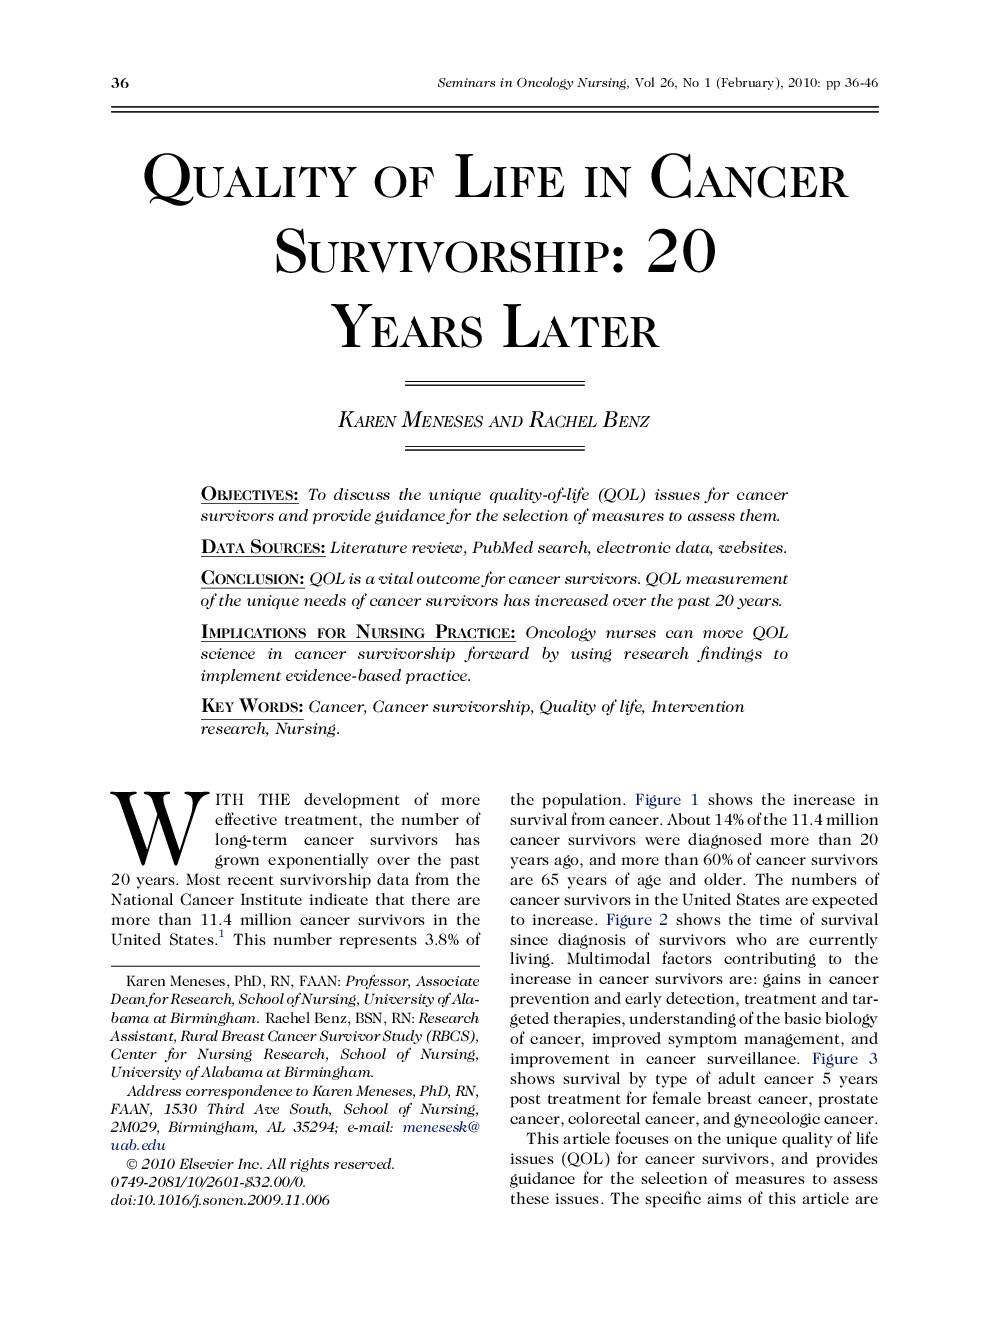 Quality of Life in Cancer Survivorship: 20 Years Later